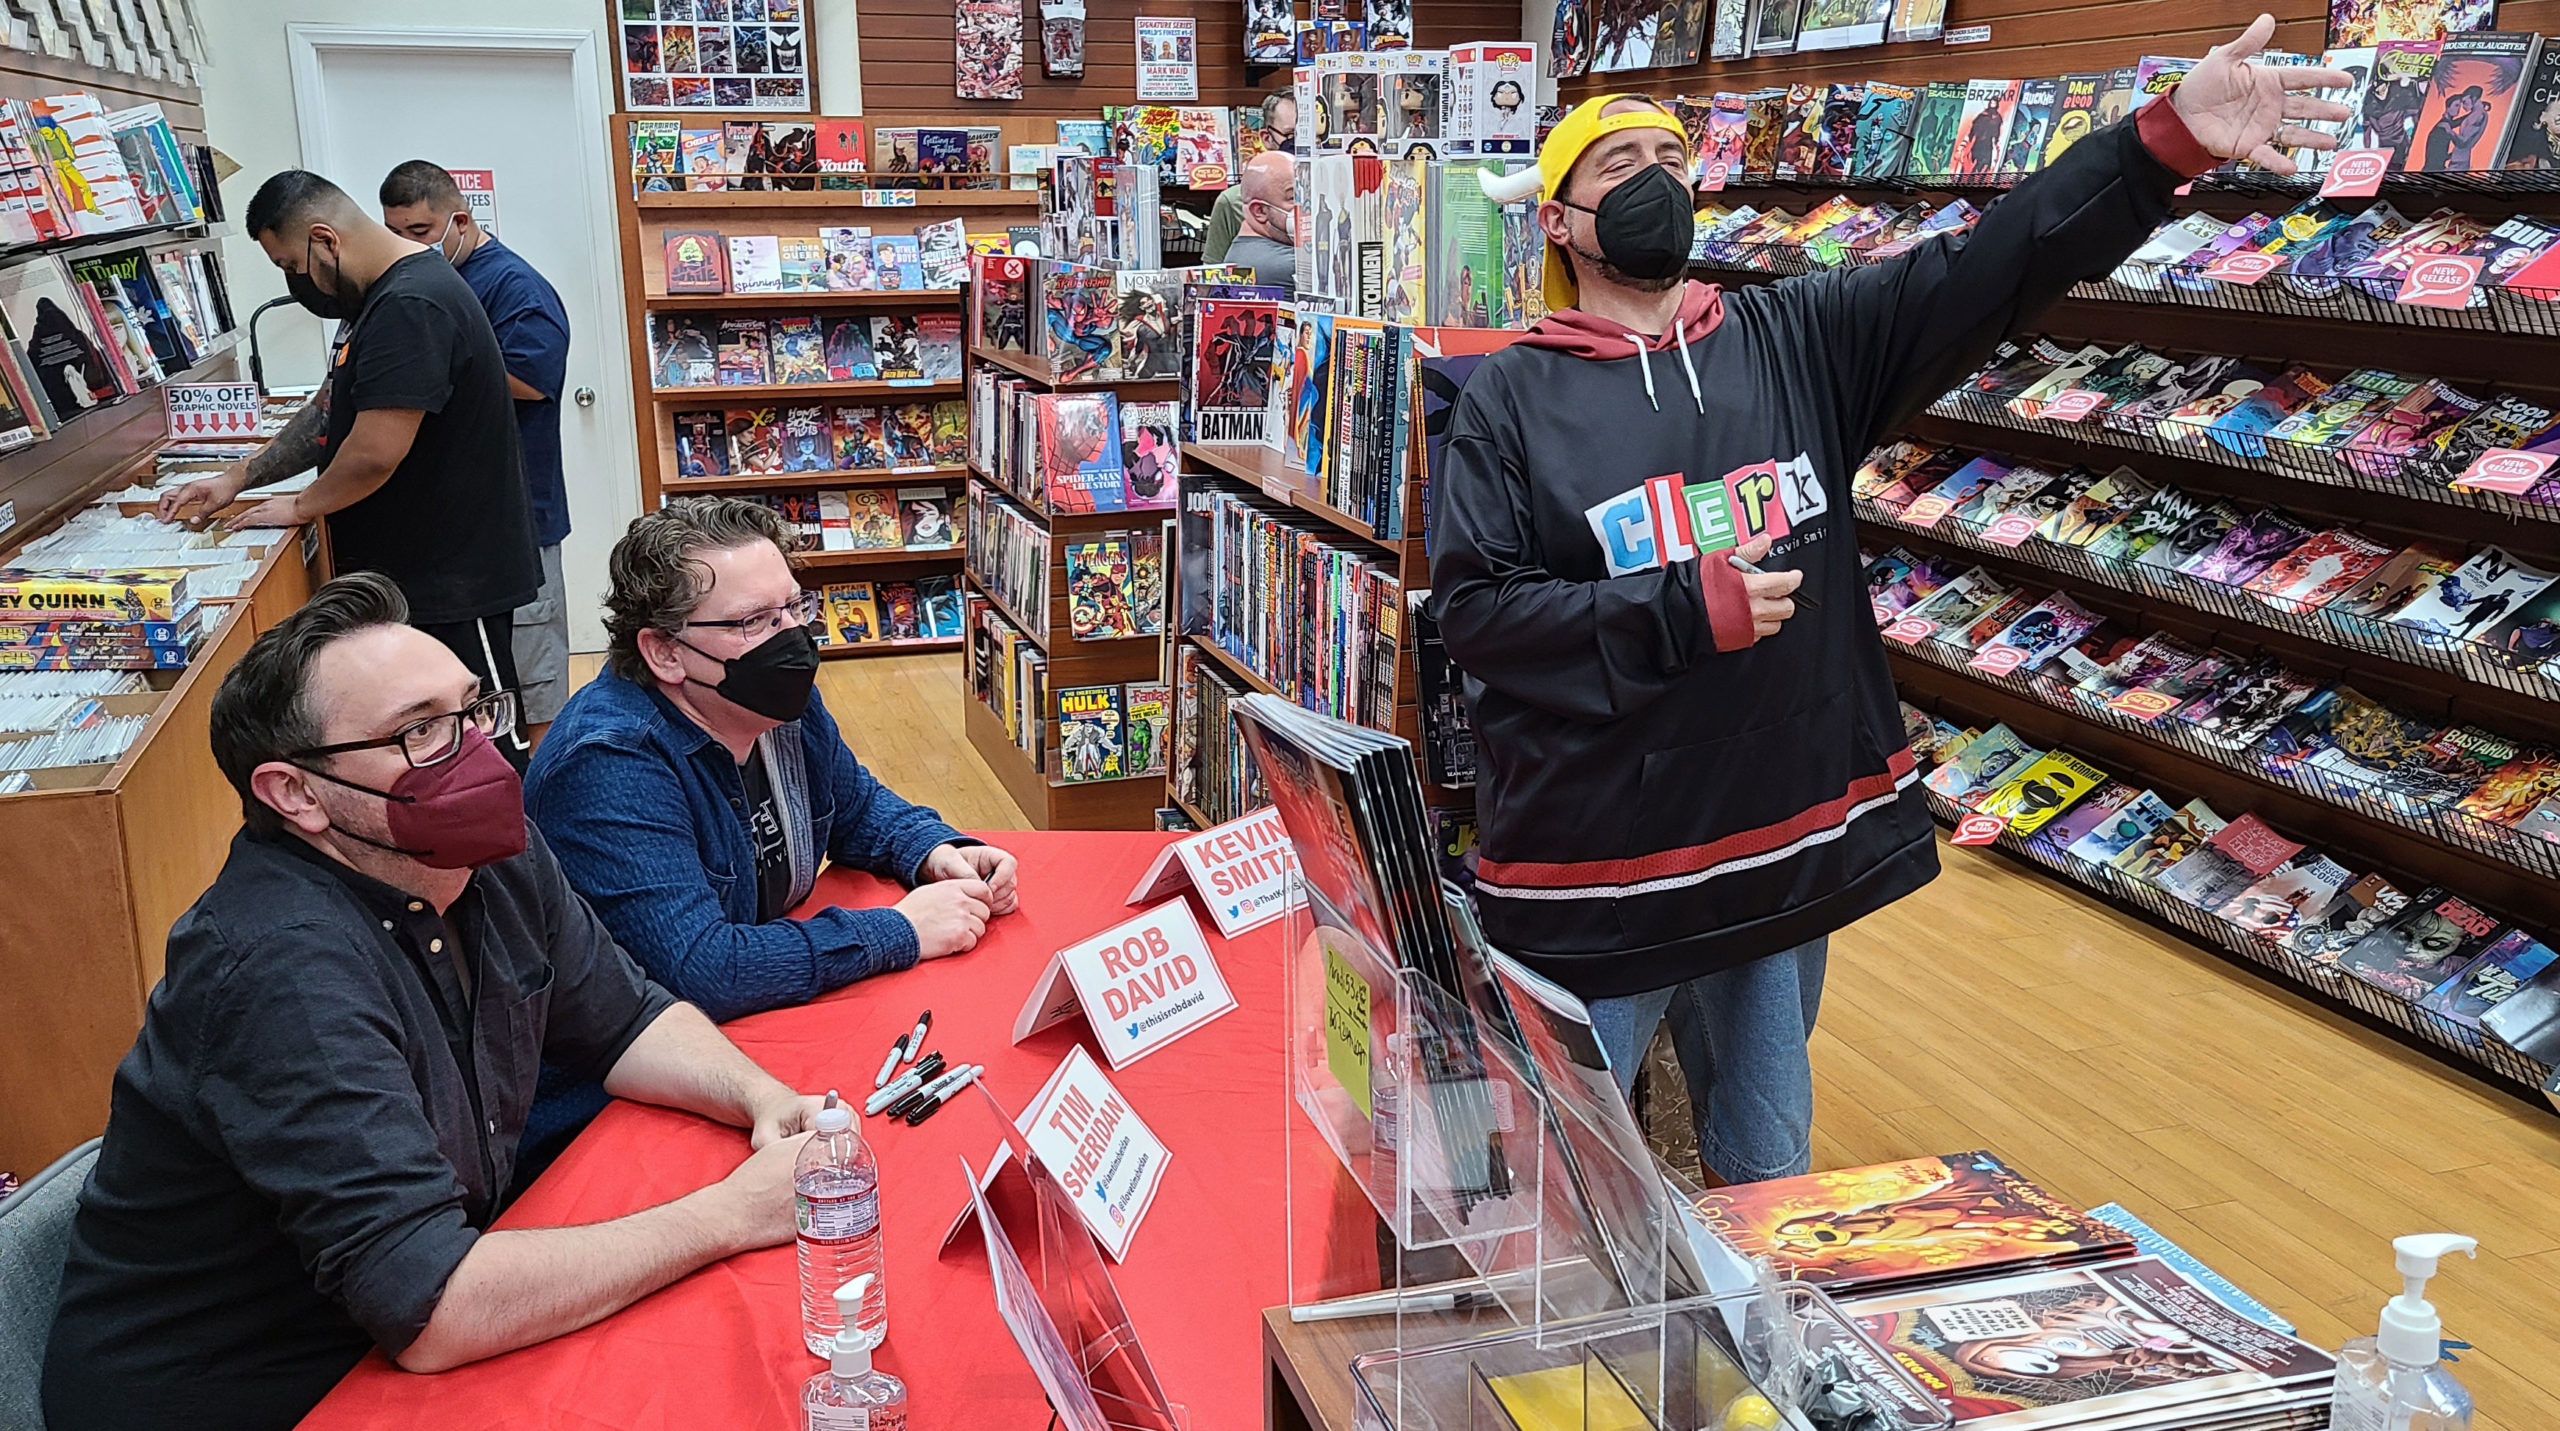 *UPDATED* Kevin Smith, Tim Sheridan & Rob David signed autographs and greeted fans today in North Hollywood!